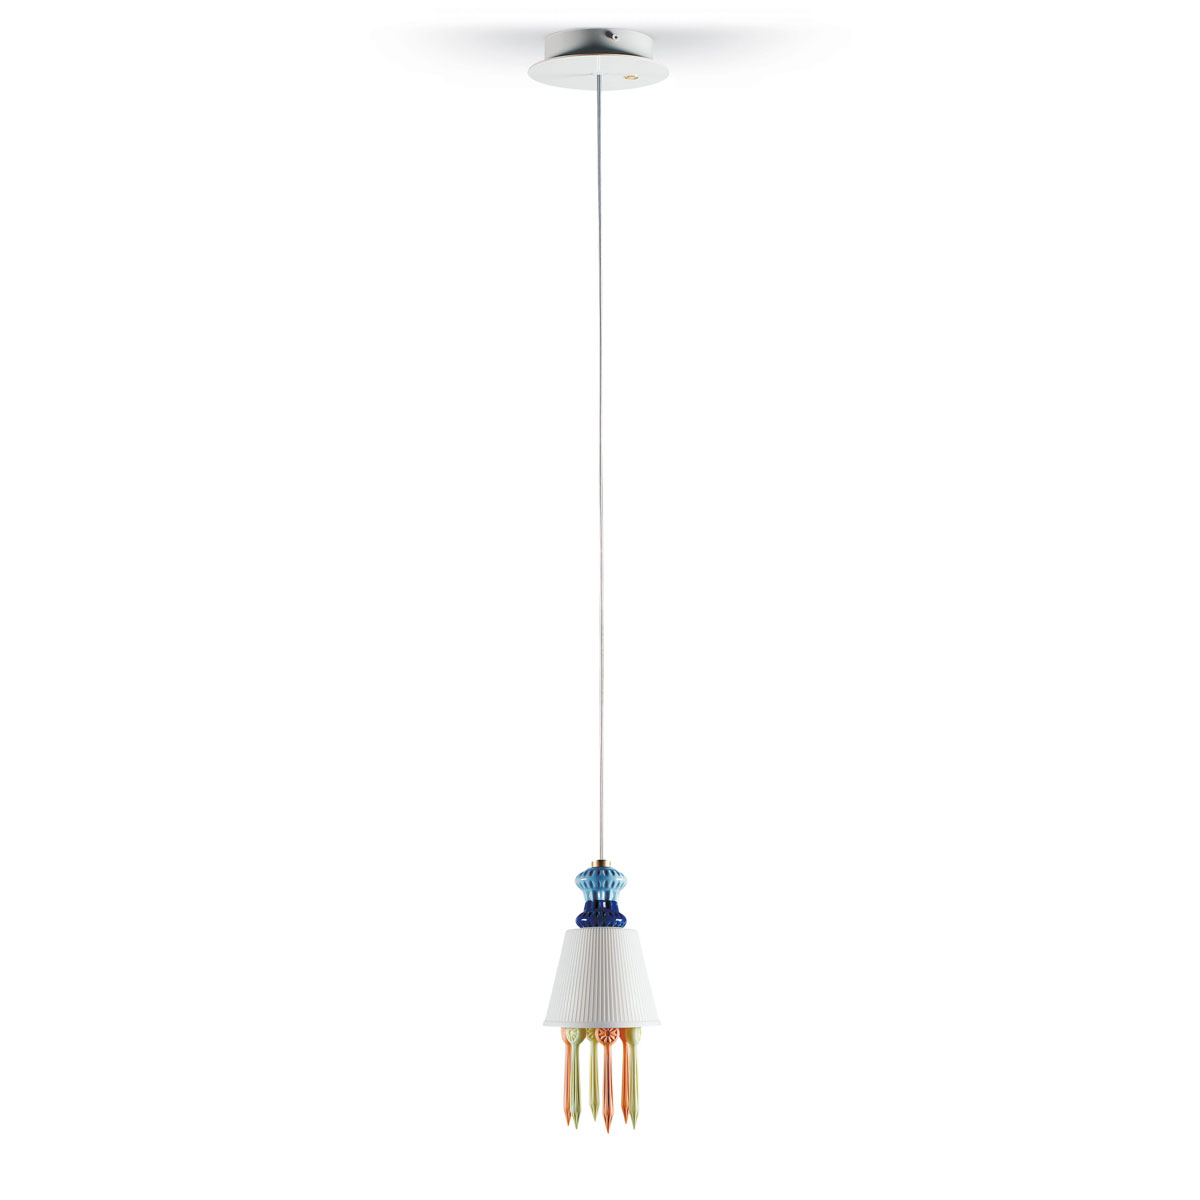 Lladro Classic Lighting, Belle De Nuit Ceiling Lamp With Lithophane And Tears. Multicolor